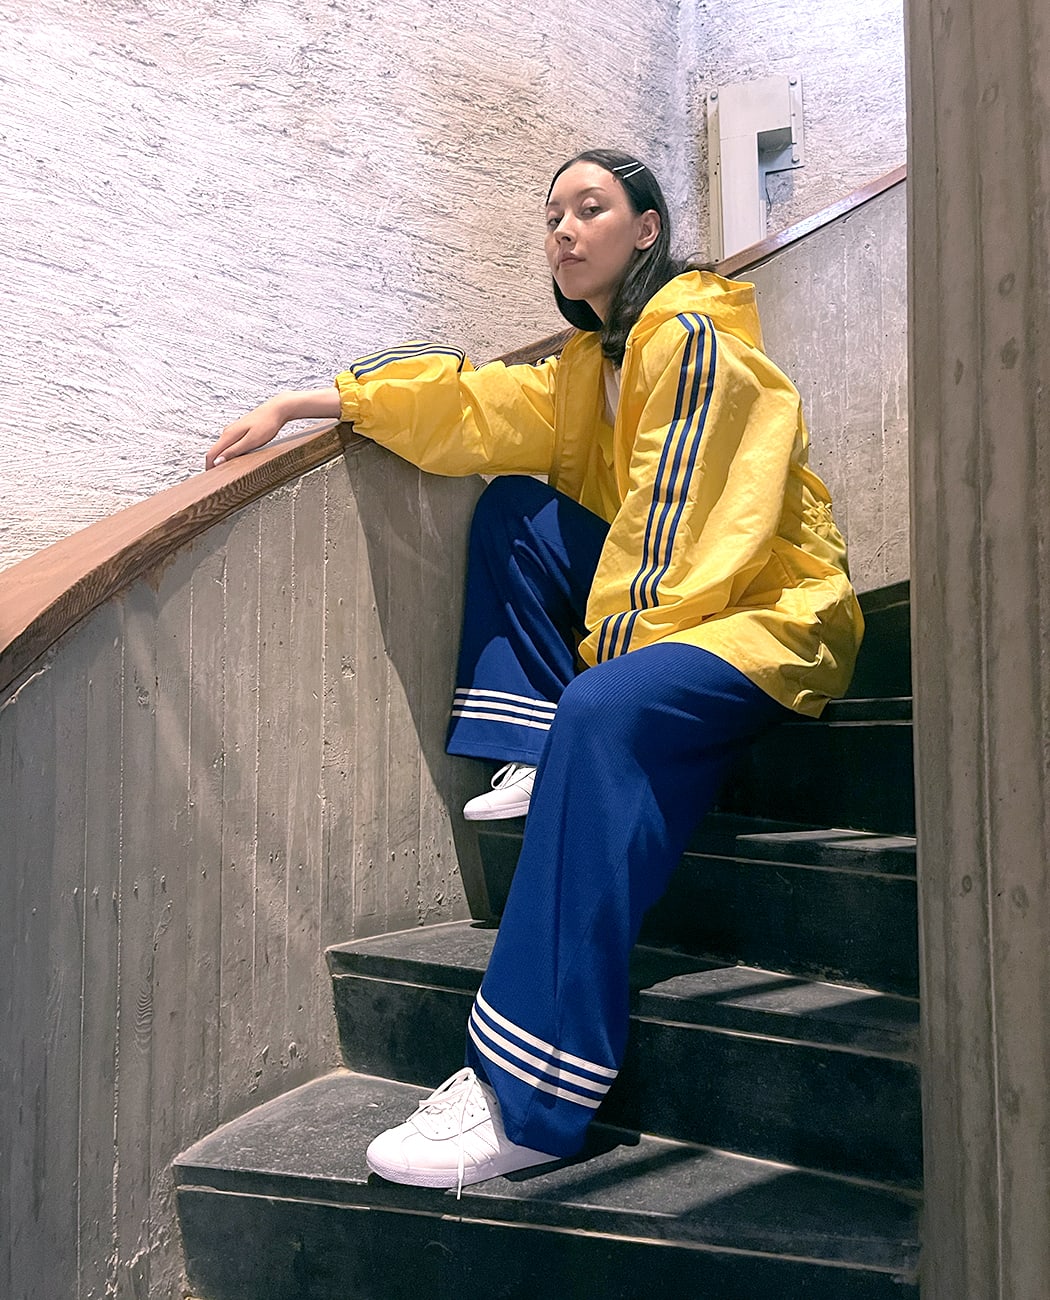 Female model sitting on a flight of stairs wearing blue pants and a yellow jacket, with white adidas Gazelle sneakers.